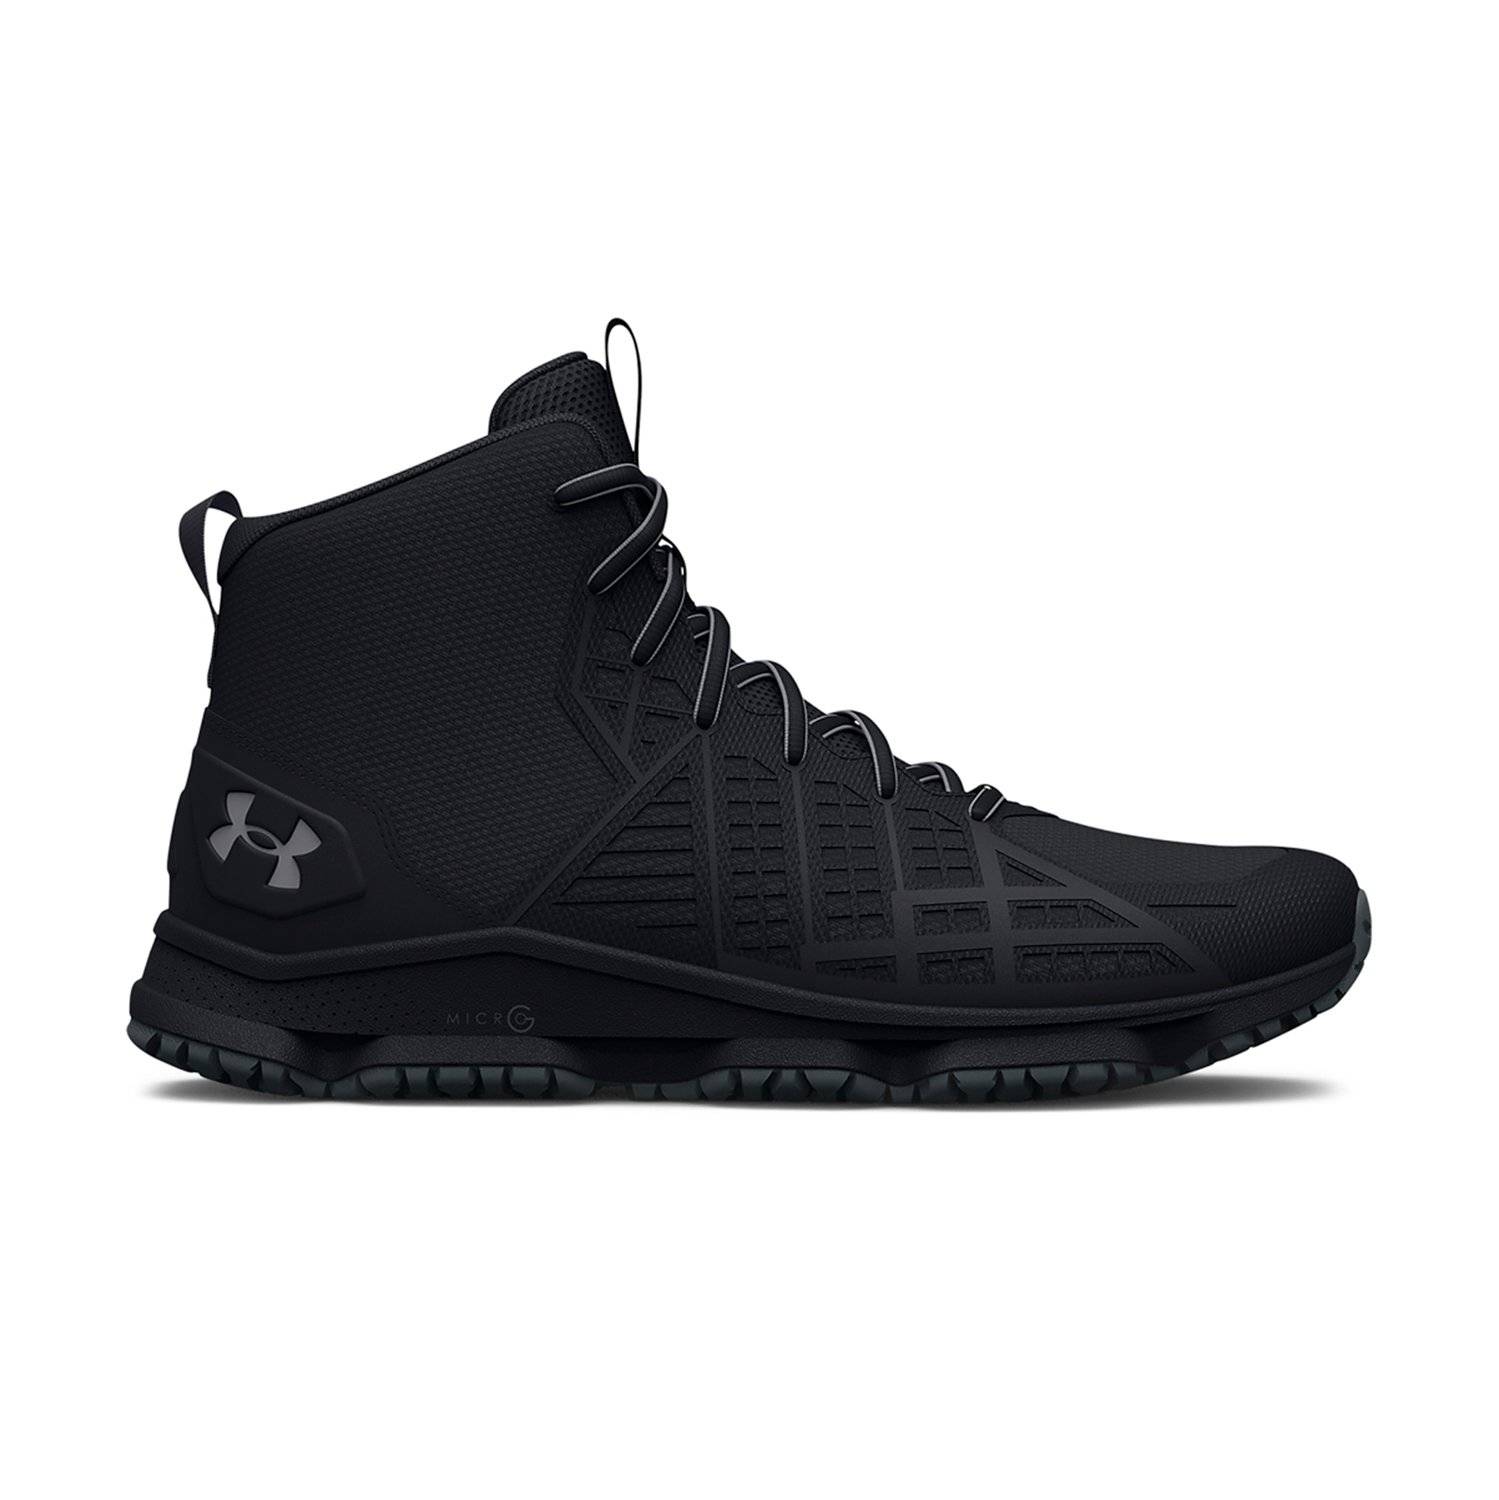 UNDER ARMOUR MEN'S MICRO G STRIKEFAST MID TACTICAL BOOTS